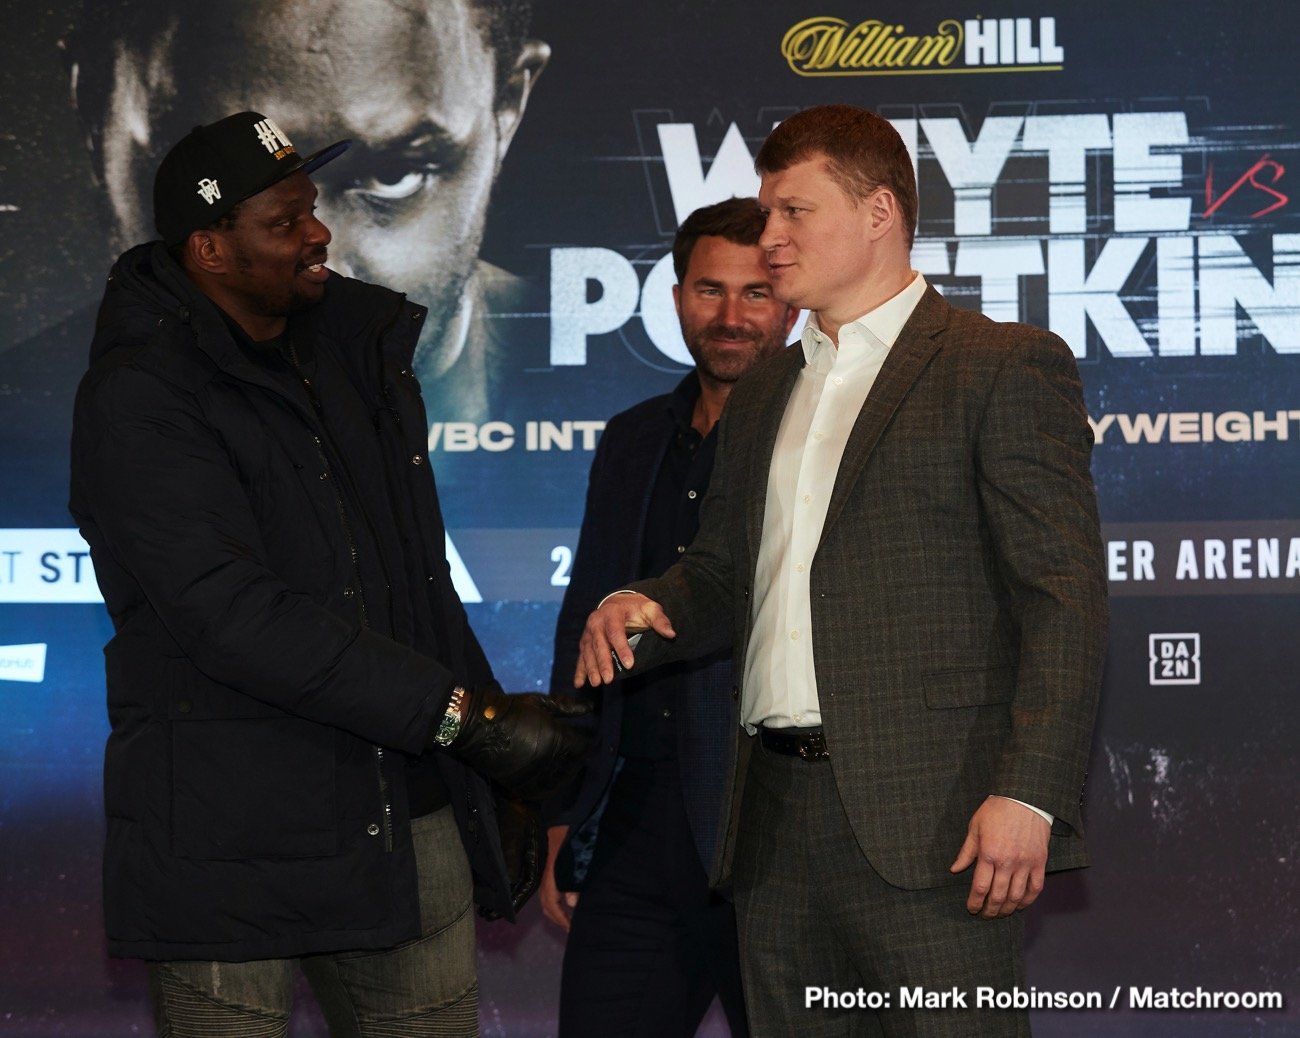 Image: WBC president expects Dillian Whyte to fight for title in February 2021